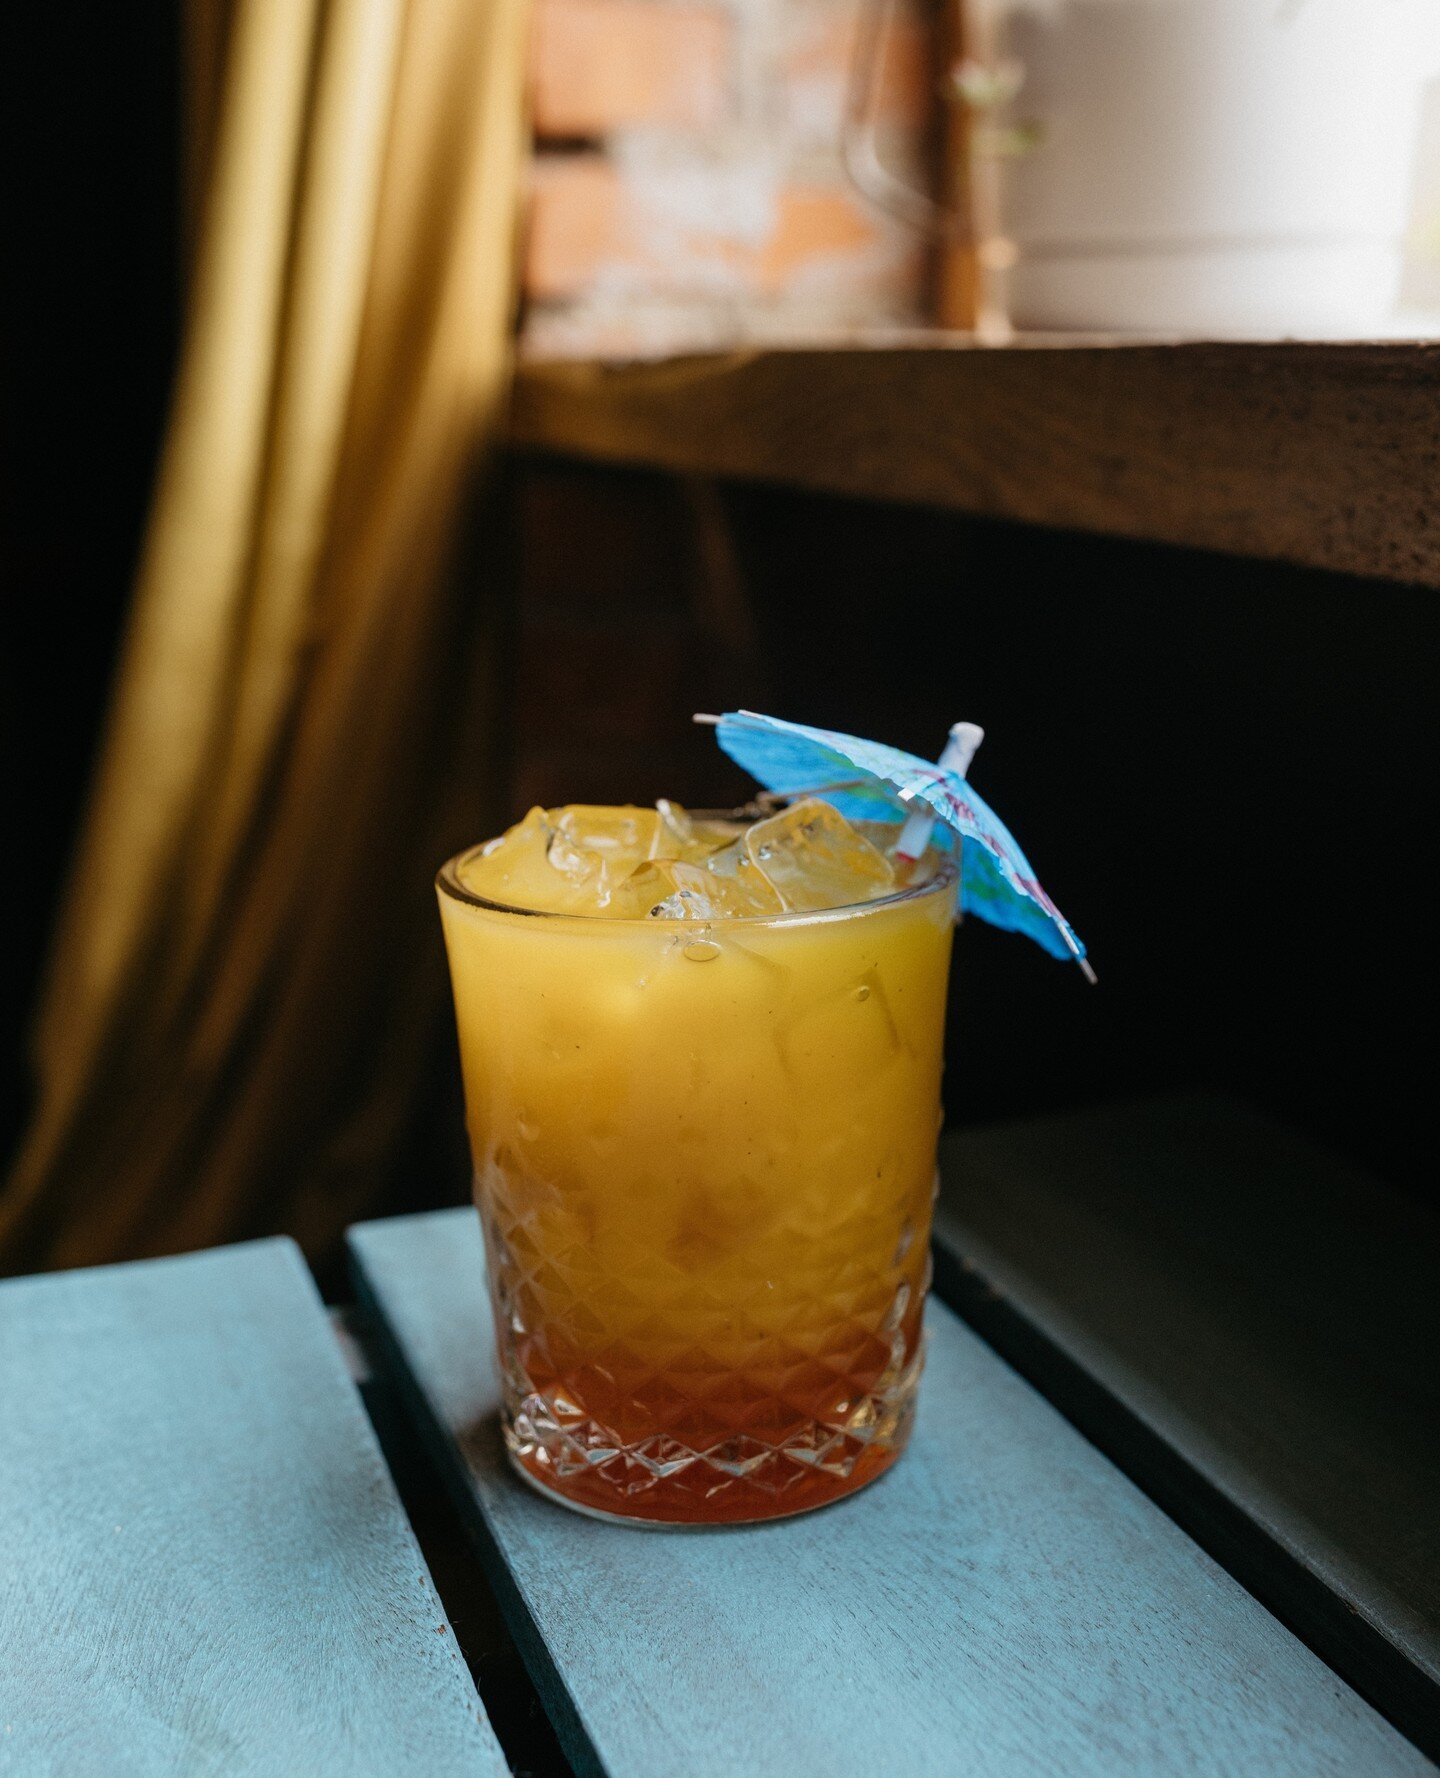 Meet our High Tide. It looks kind of like a tequila sunrise + is named after a song on our Salt+ playlist that&rsquo;s curated by our very own @caoverbeck! 
.⁠
+ High Tide 🍹⁠
Benham&rsquo;s Sonoma Dry Gin, Spiced Chai Syrup, Mango, Lemon, Orgeat + A